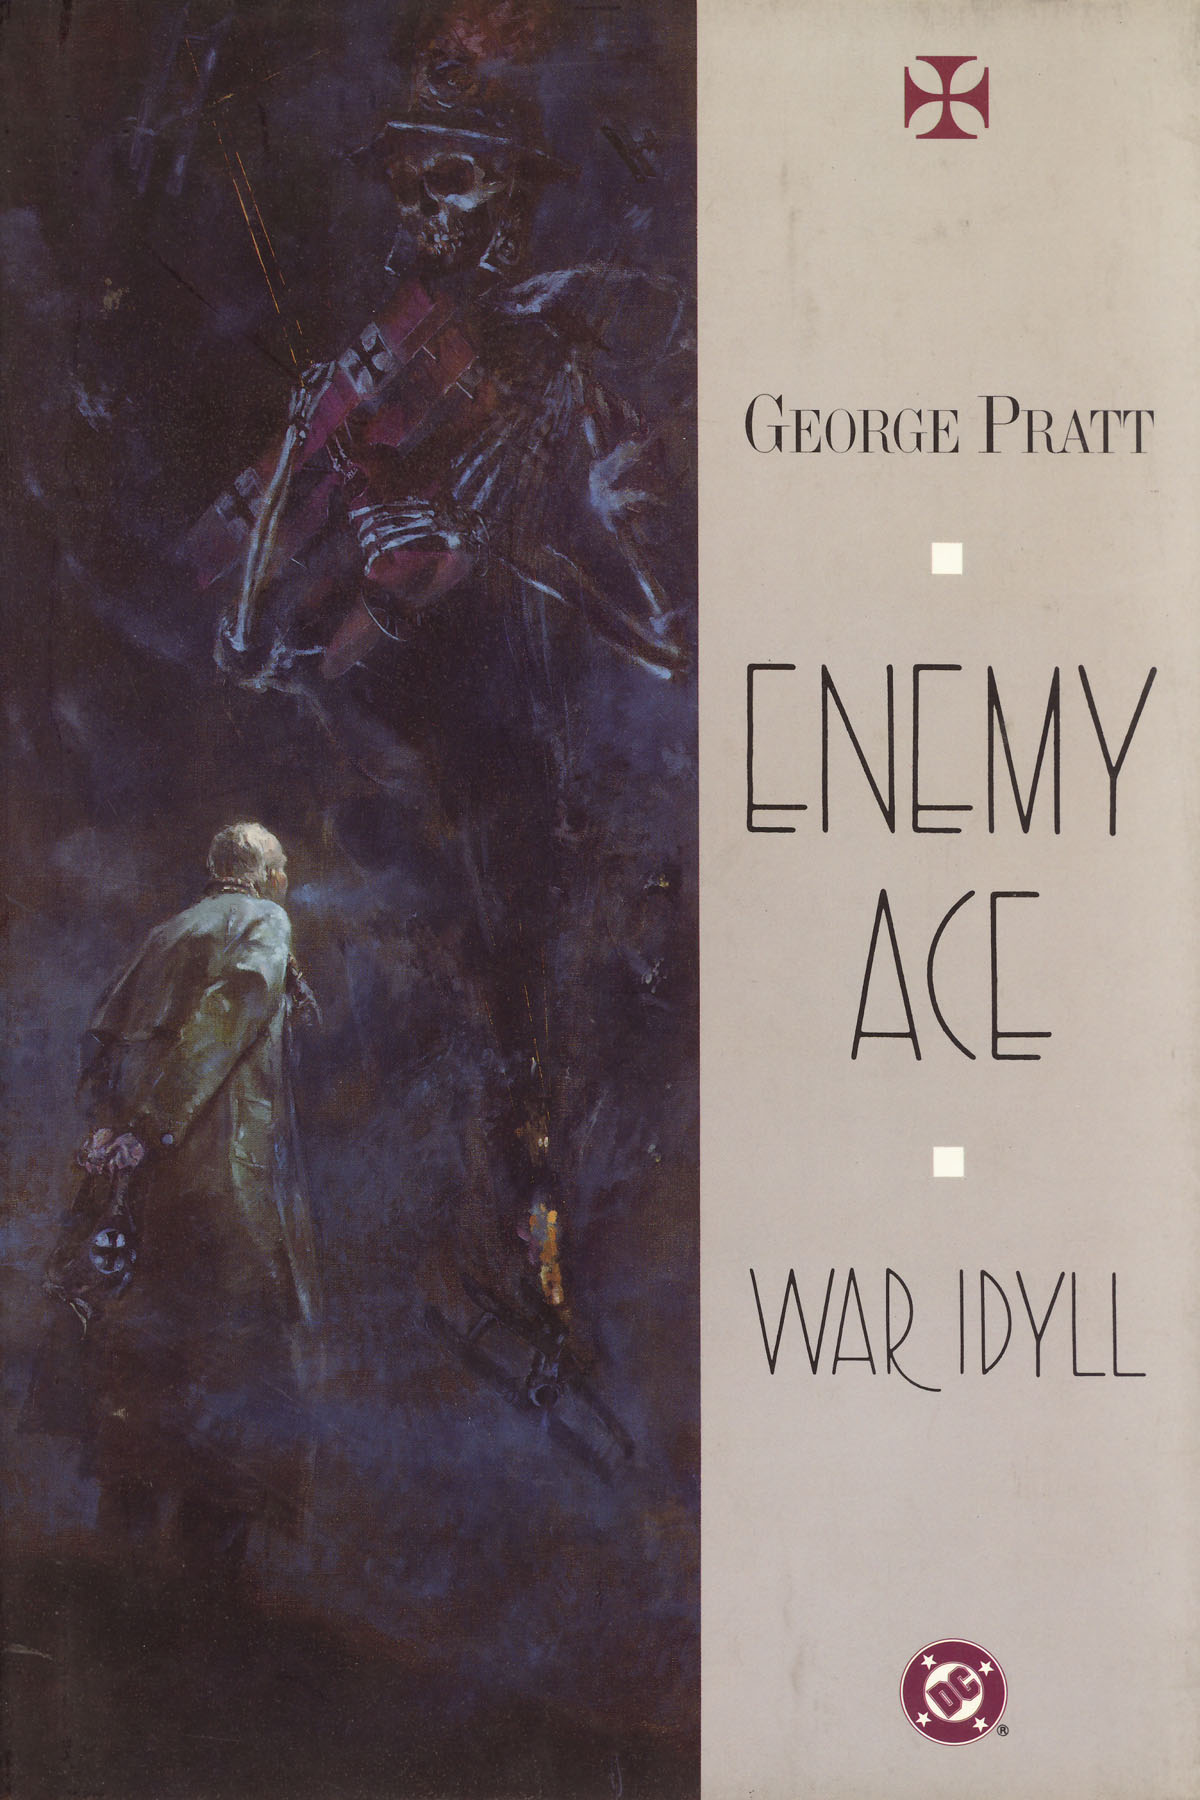 Read online Enemy Ace: War Idyll comic -  Issue # TPB - 1